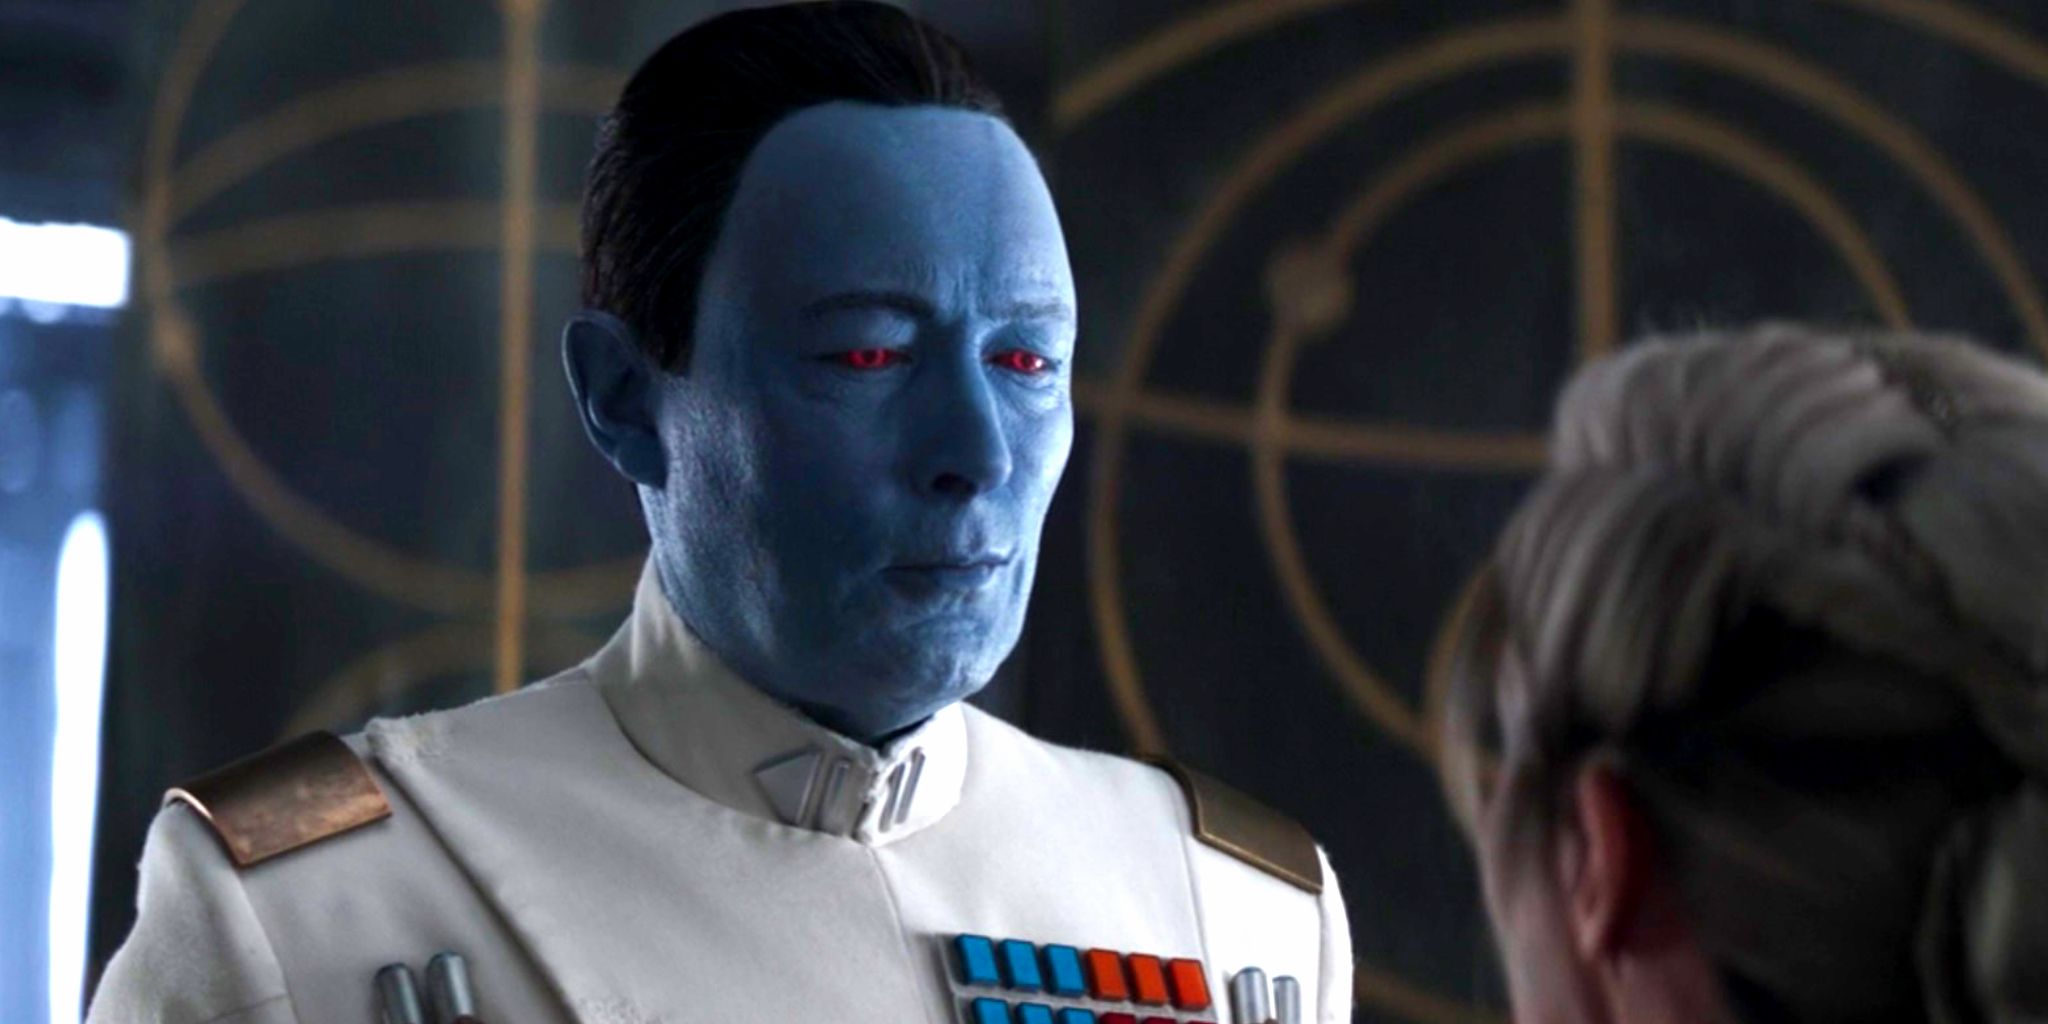 15 Star Wars TV Show Actors Who Deserve To Be In The Movies